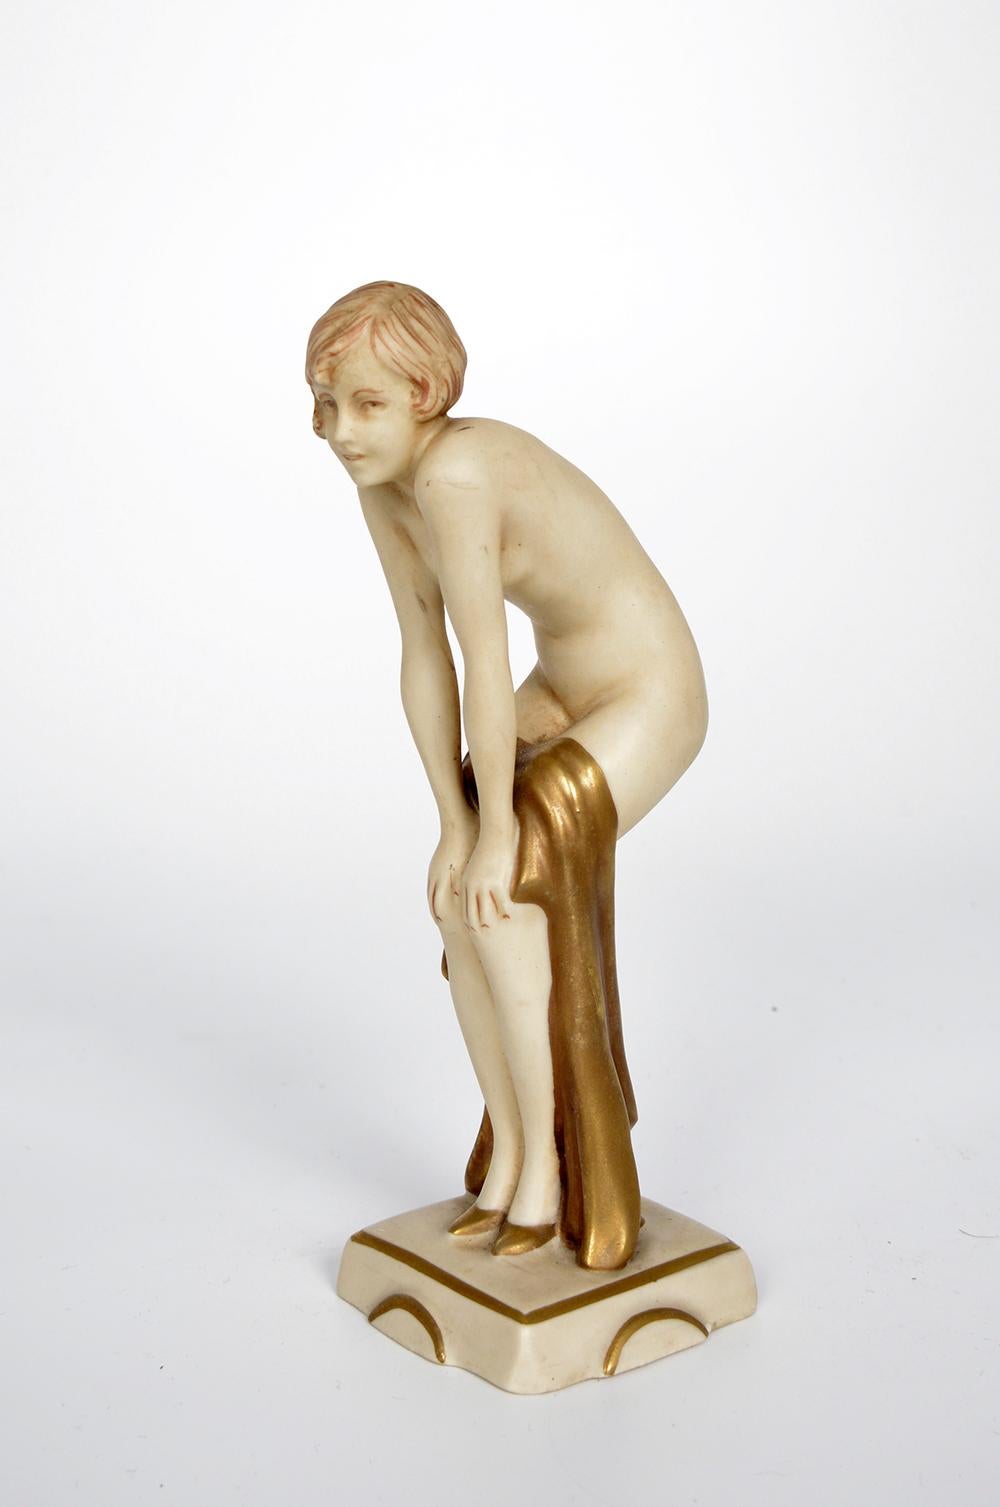 A charming and well-modelled Royal Dux Art Deco figure of a nude female by Elly Strobach (b.1908), with soft bisque ivory flesh tones, beautifully detailed painting of the hair and hands, her knees bent with a gold material draped across her thighs.